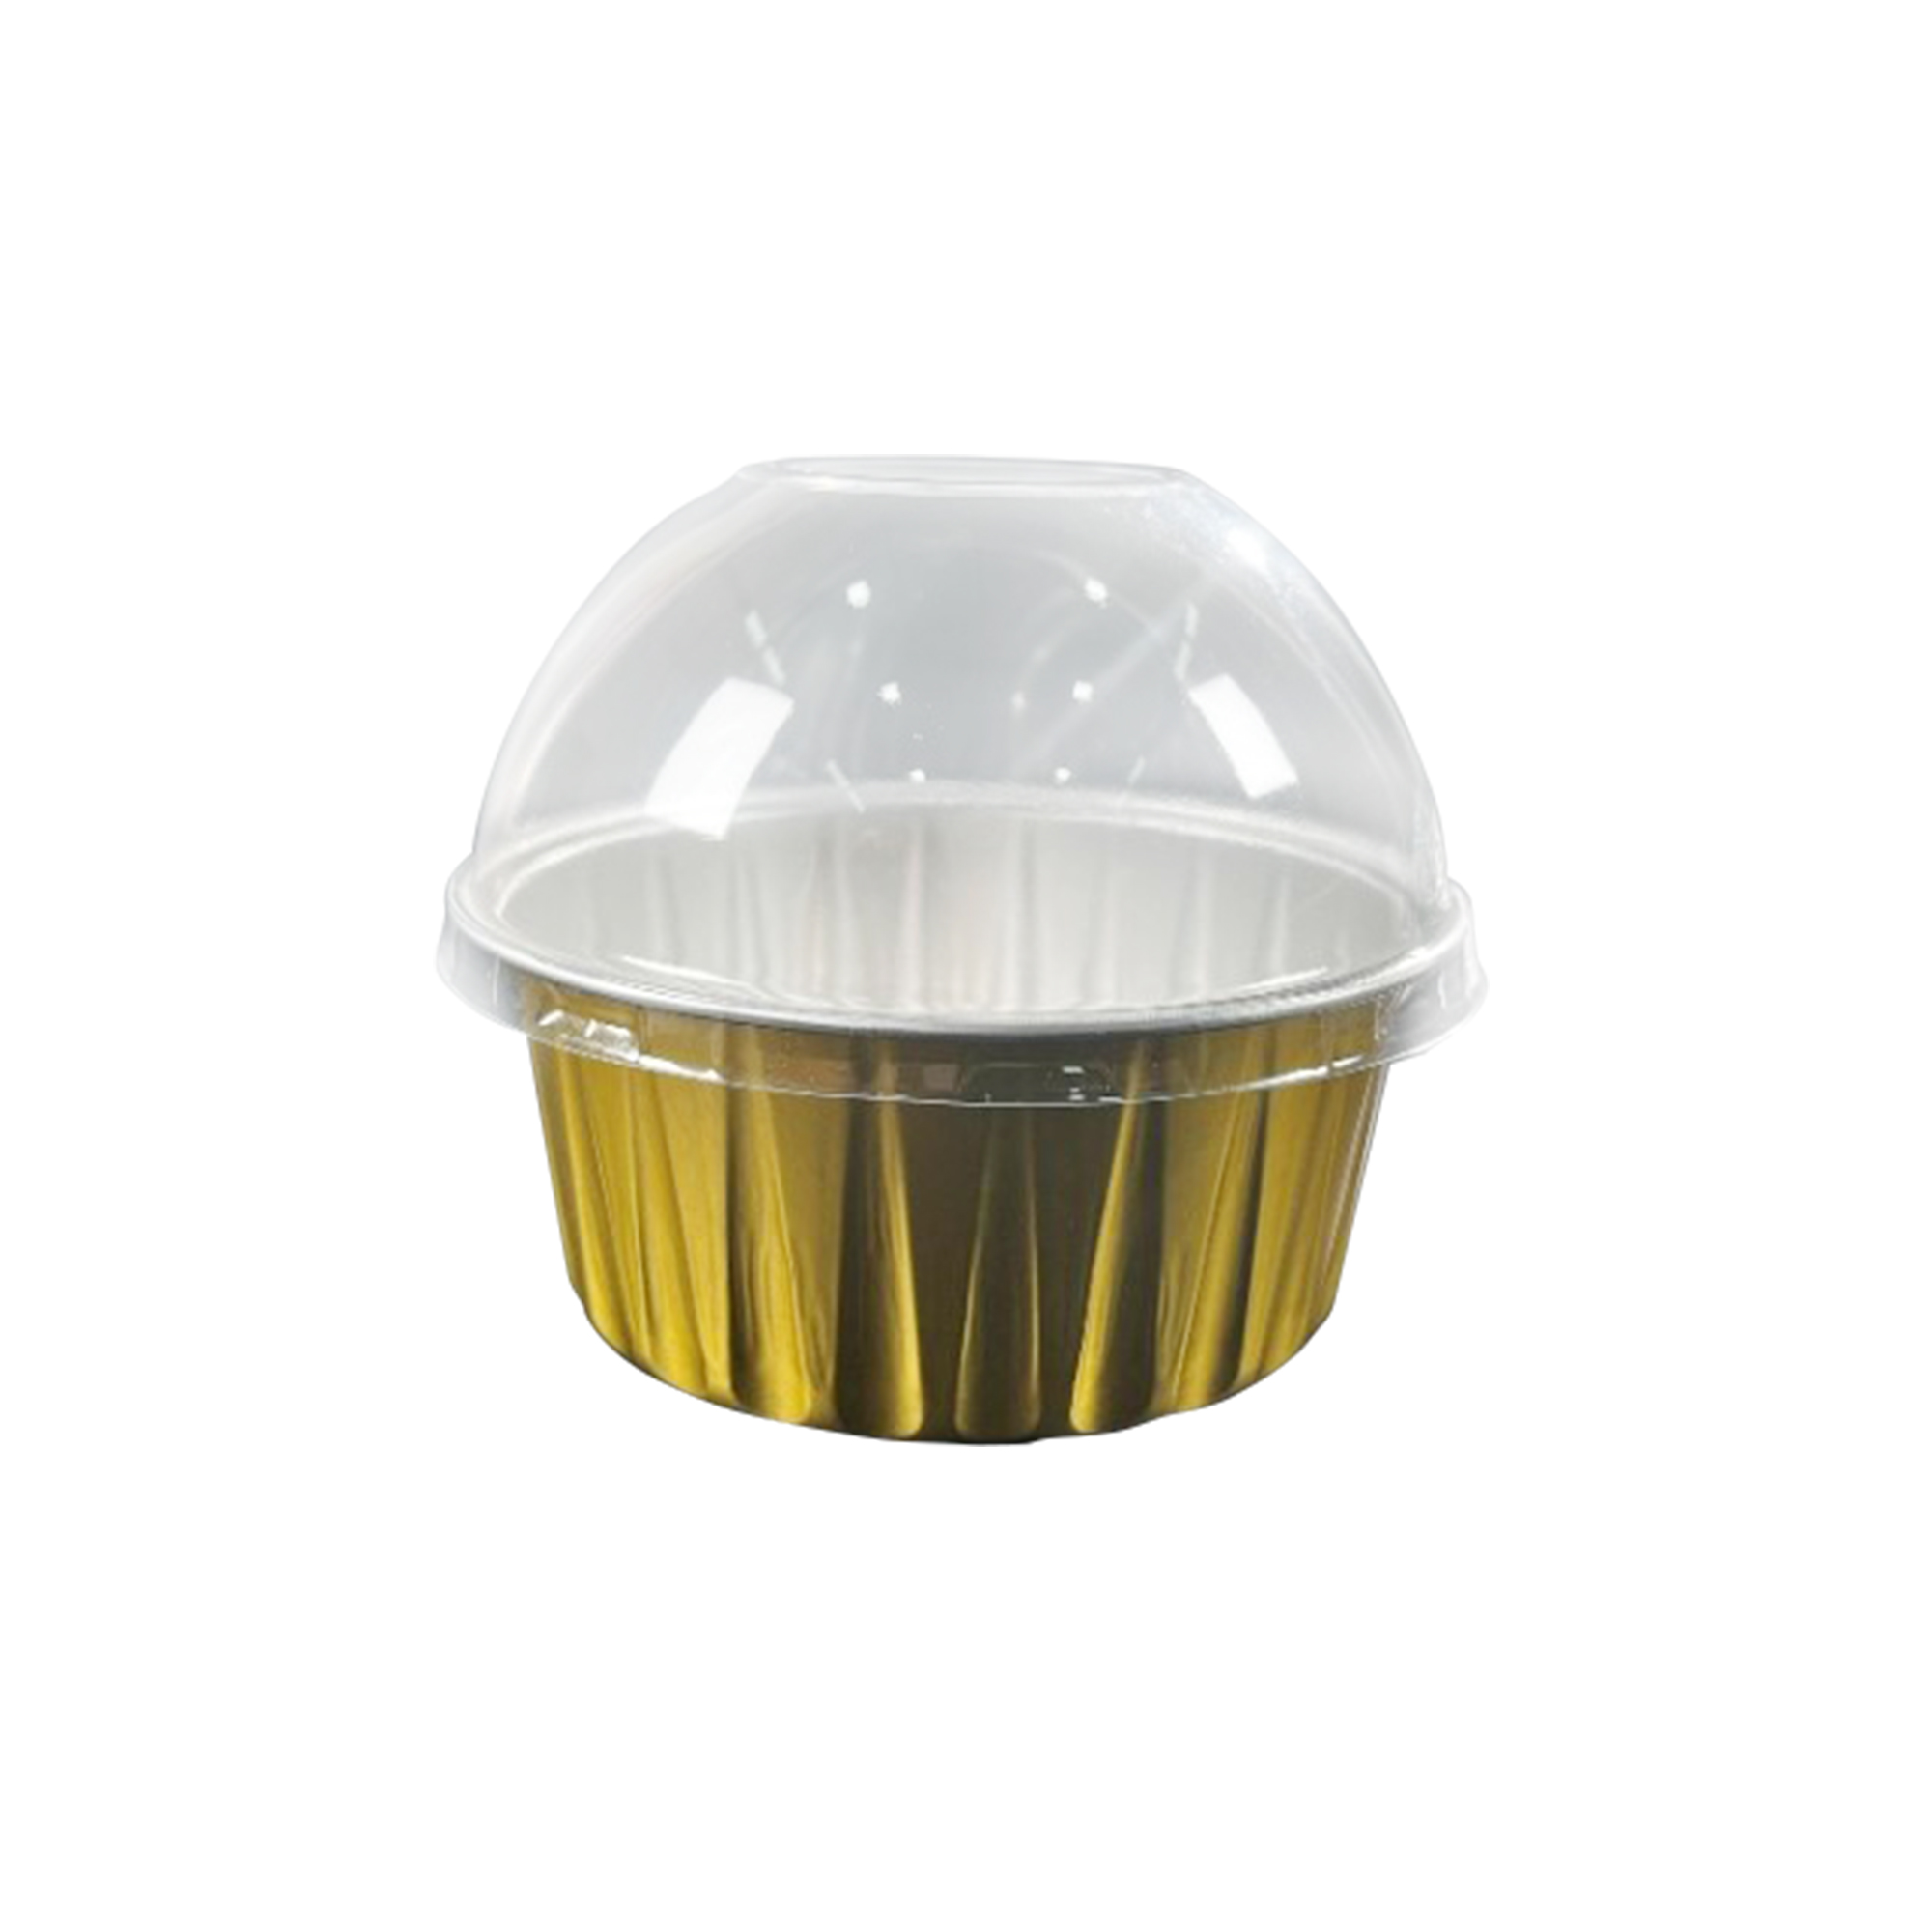 4oz Round Aluminum Baking Cup With Dome Lid 50pc/pack - Gold